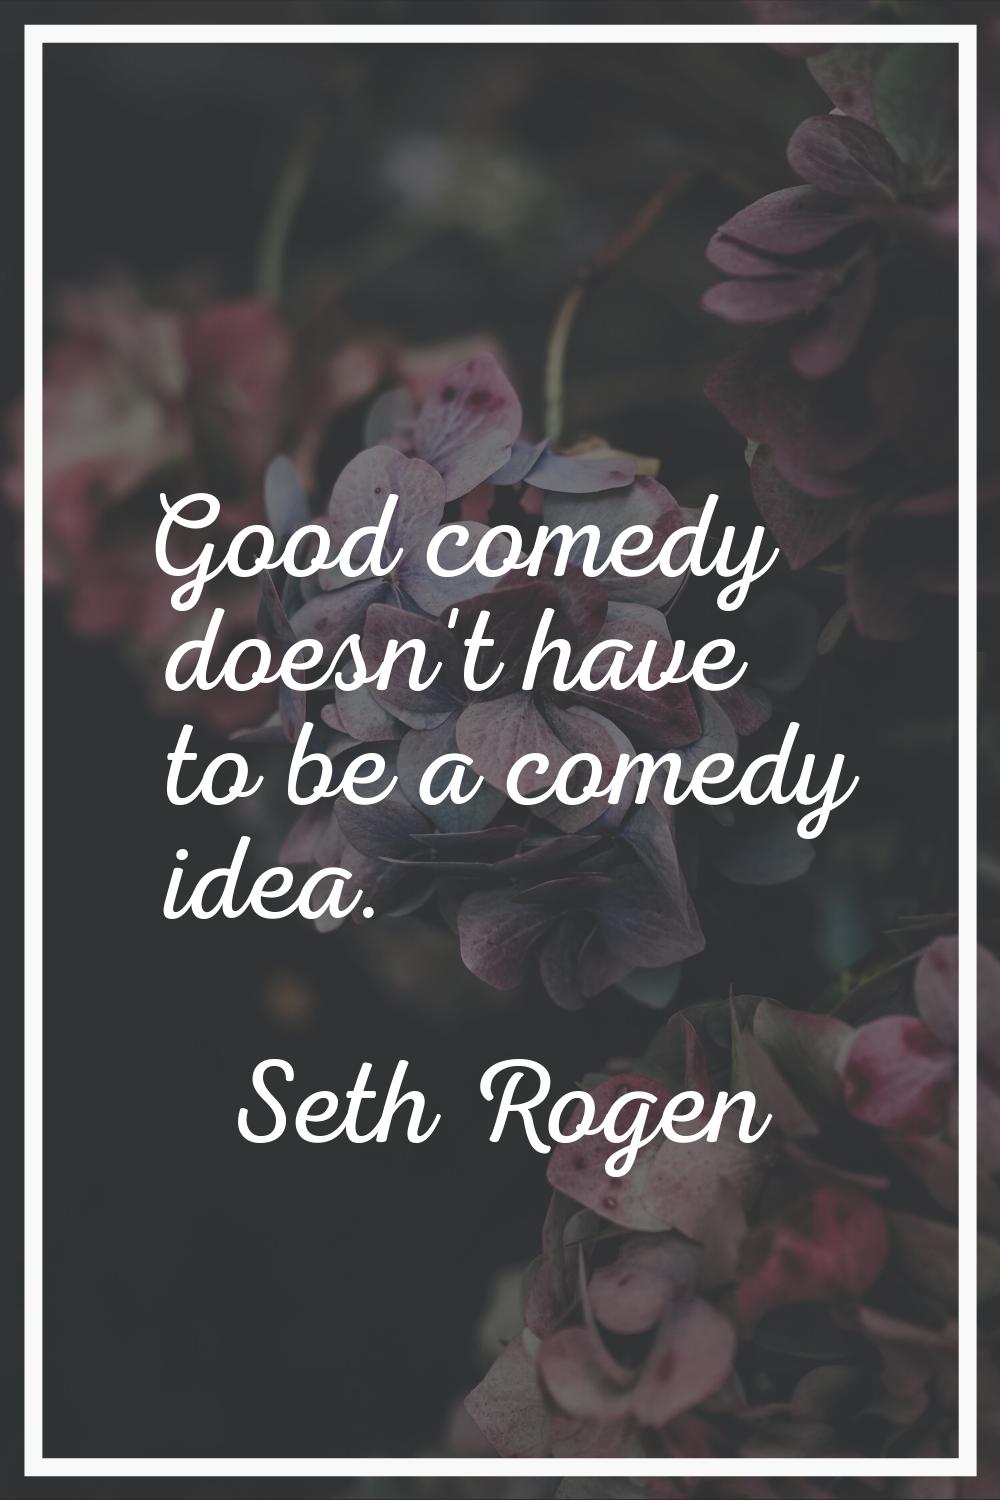 Good comedy doesn't have to be a comedy idea.